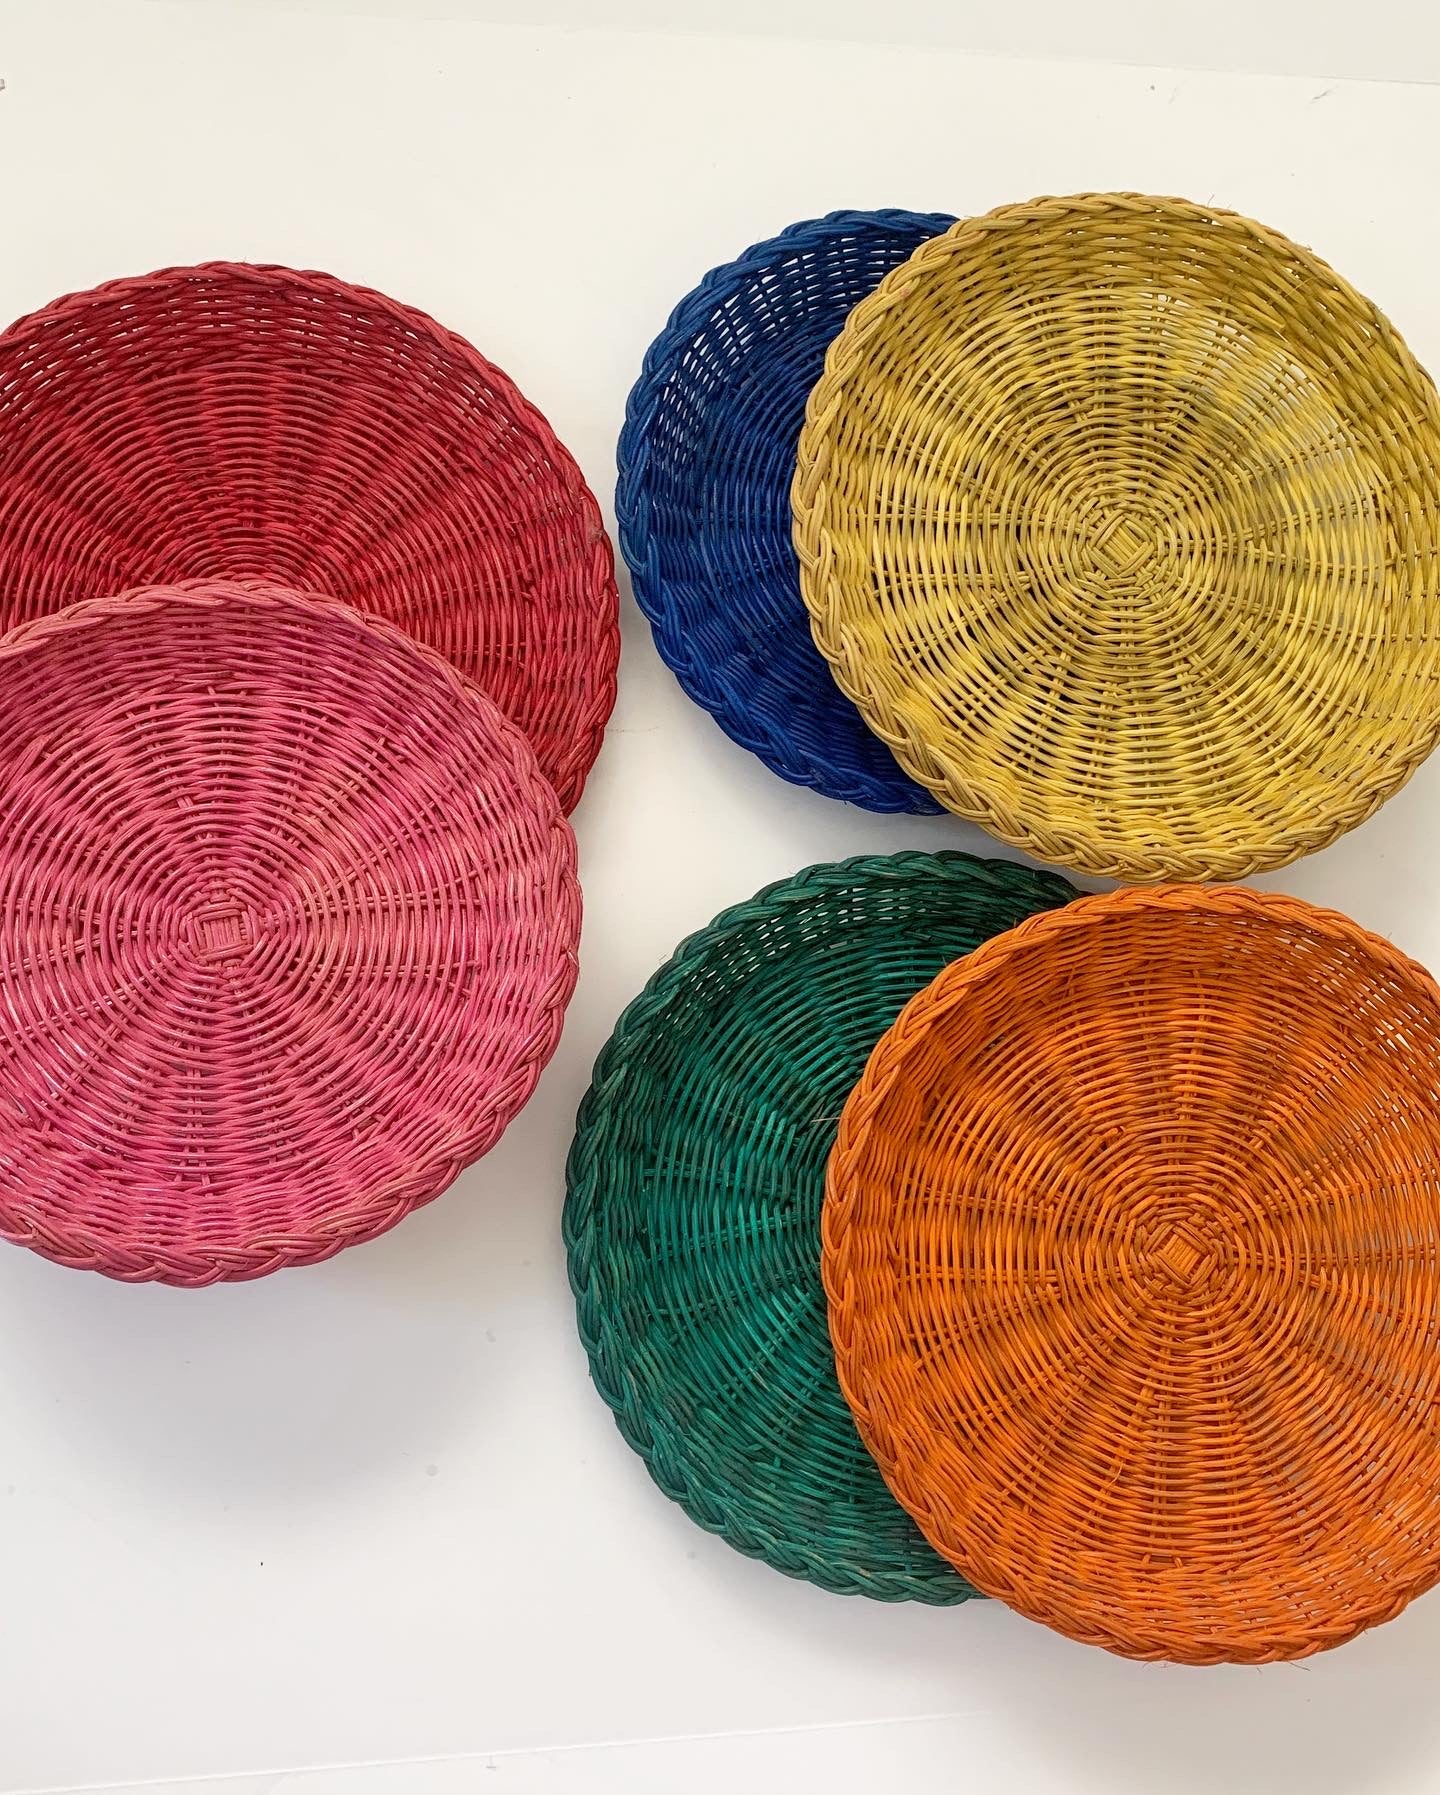 Bundle of 6 Rainbow Colorful Plate Holder Wall Baskets